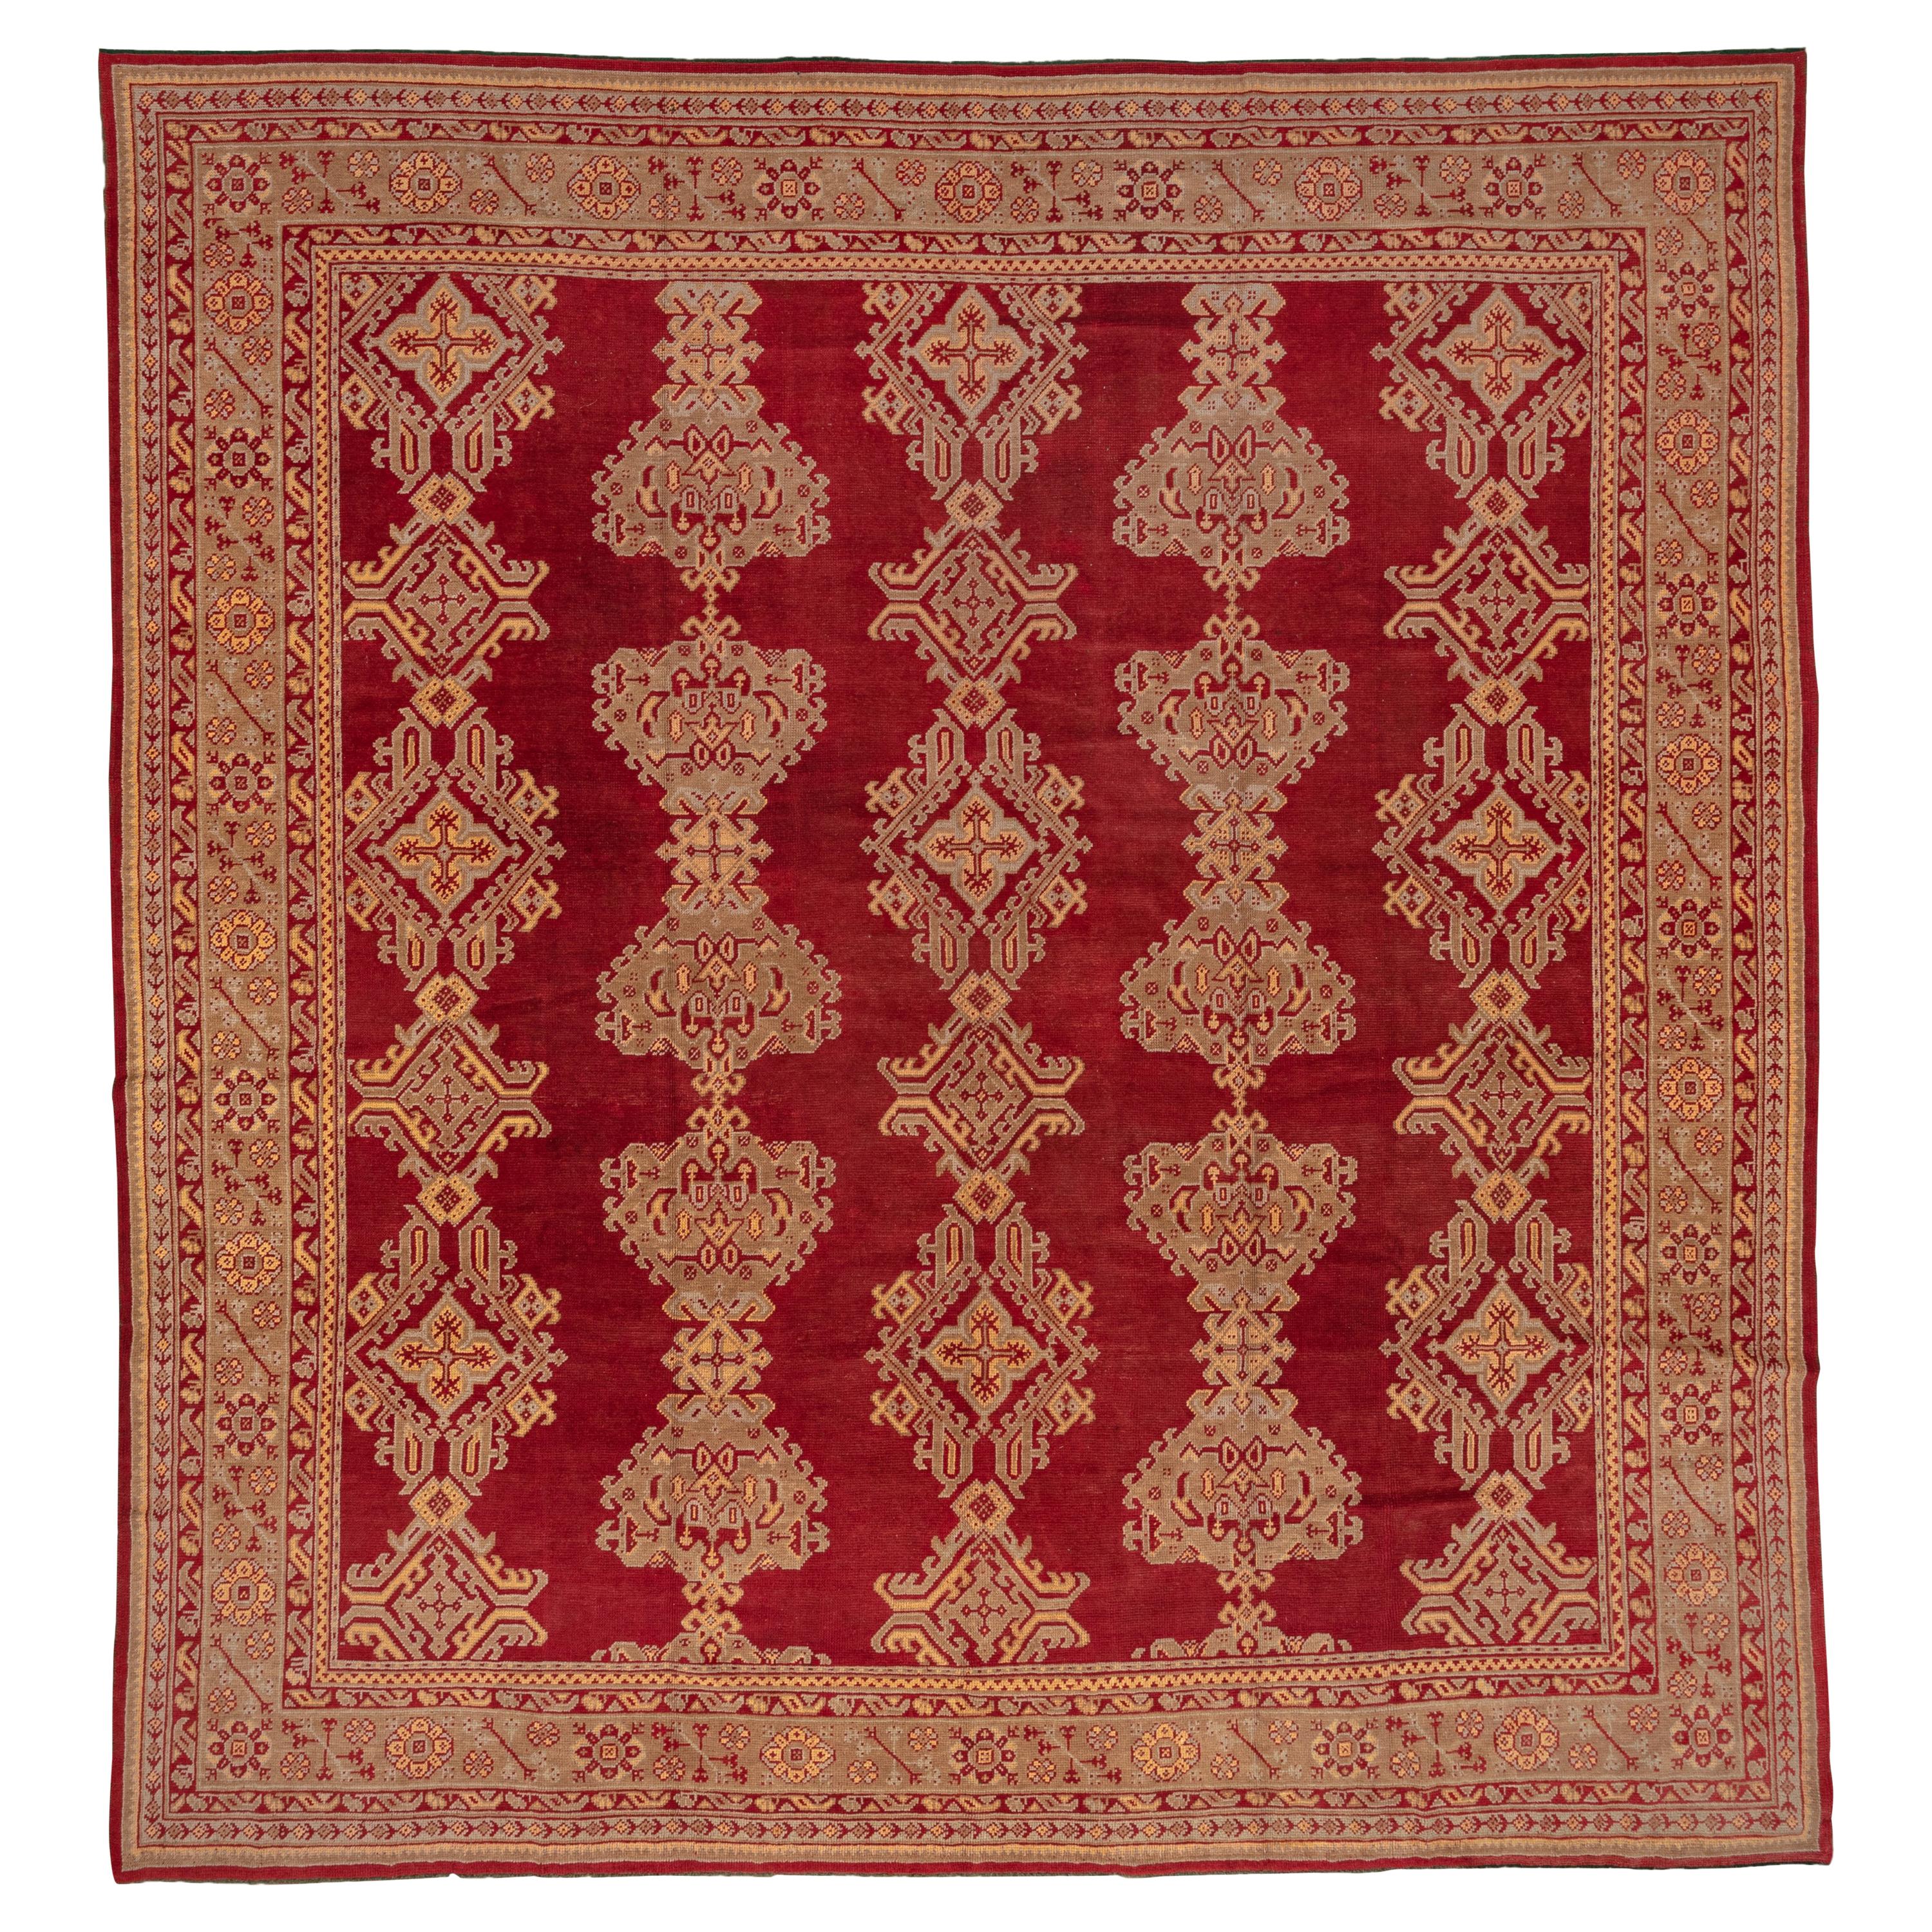 Antique Turkish Oushak Square Wool Rug, Red Allover Field, Circa 1920s